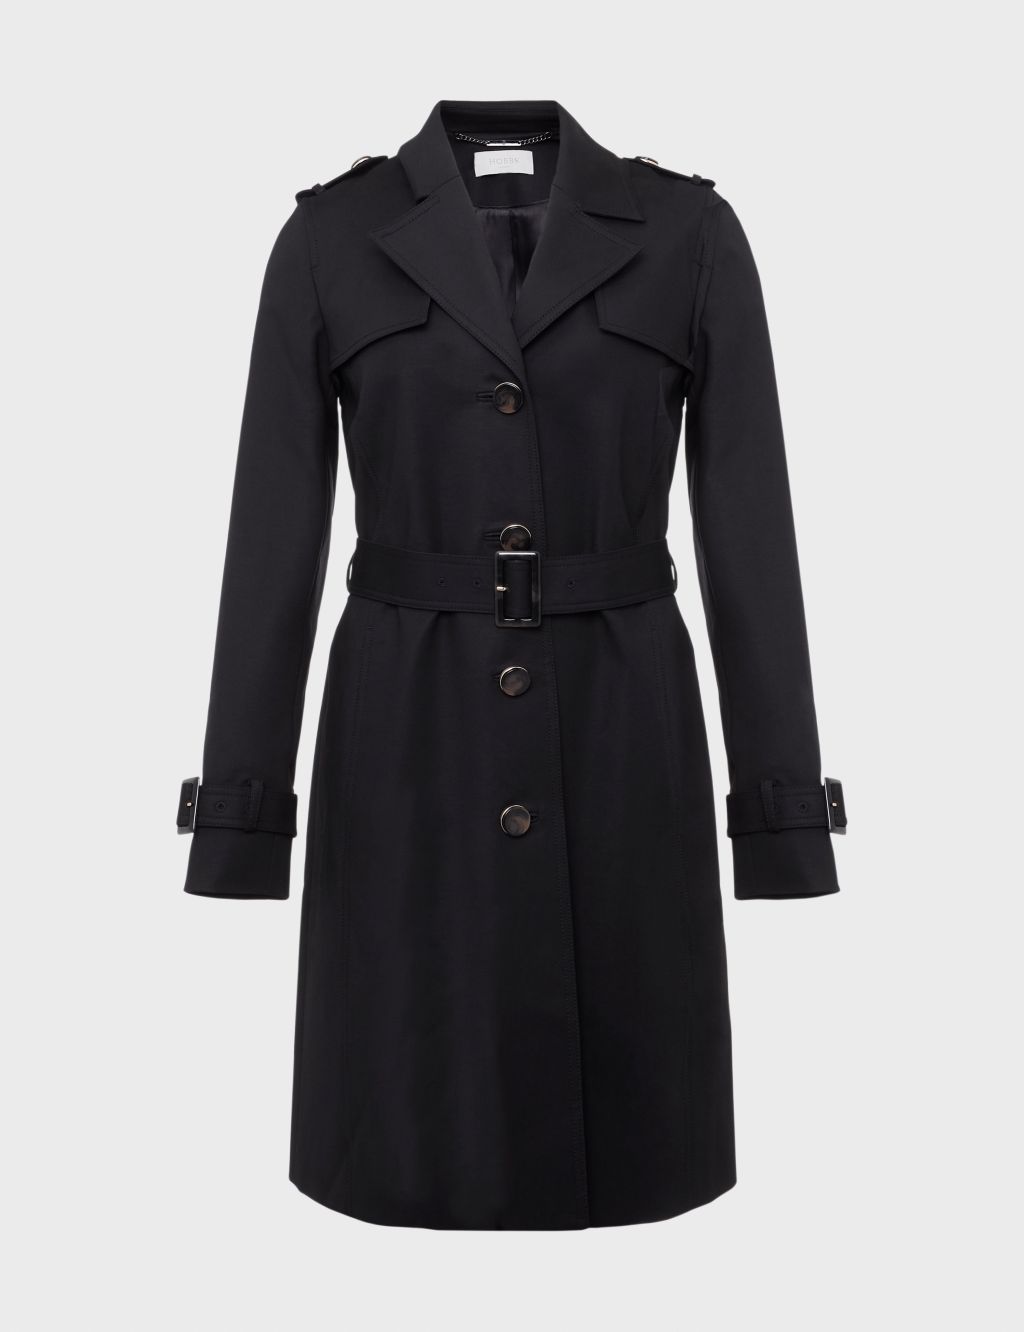 Cotton Rich Belted Trench Coat image 2